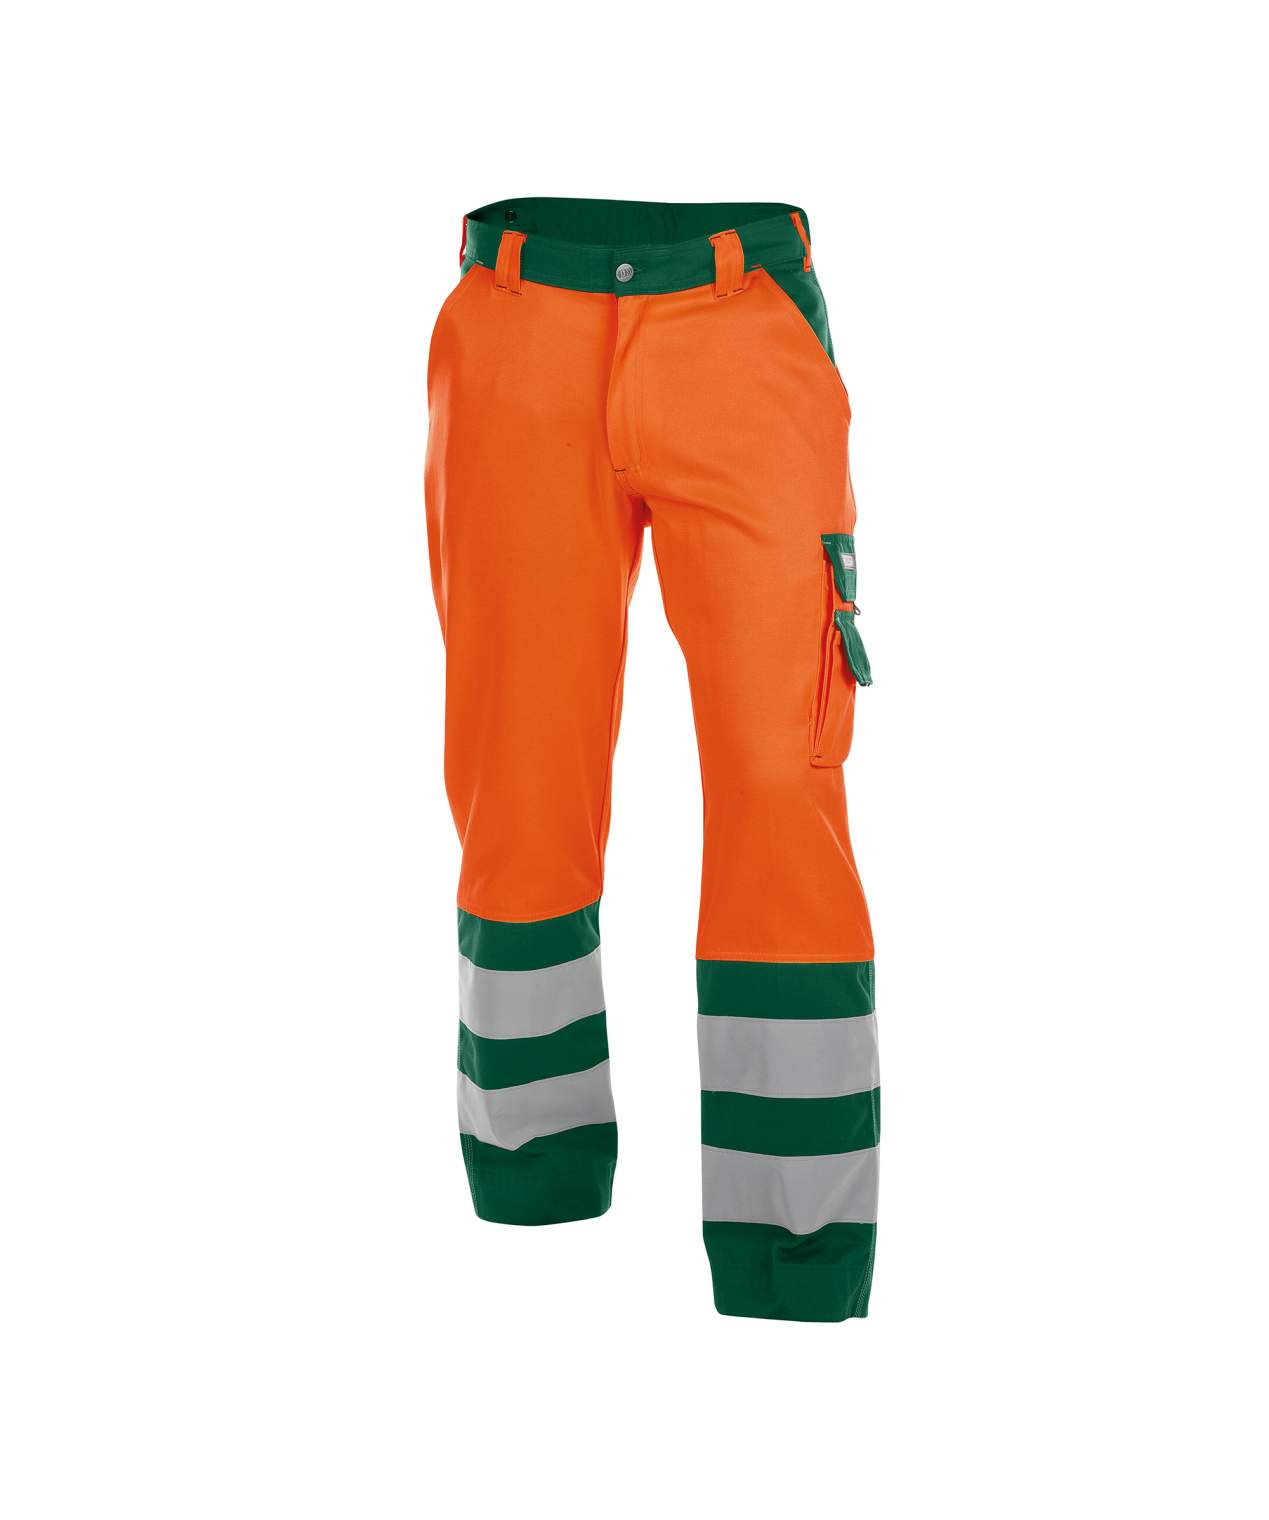 lancaster high visibility work trousers fluo orange bottle green front